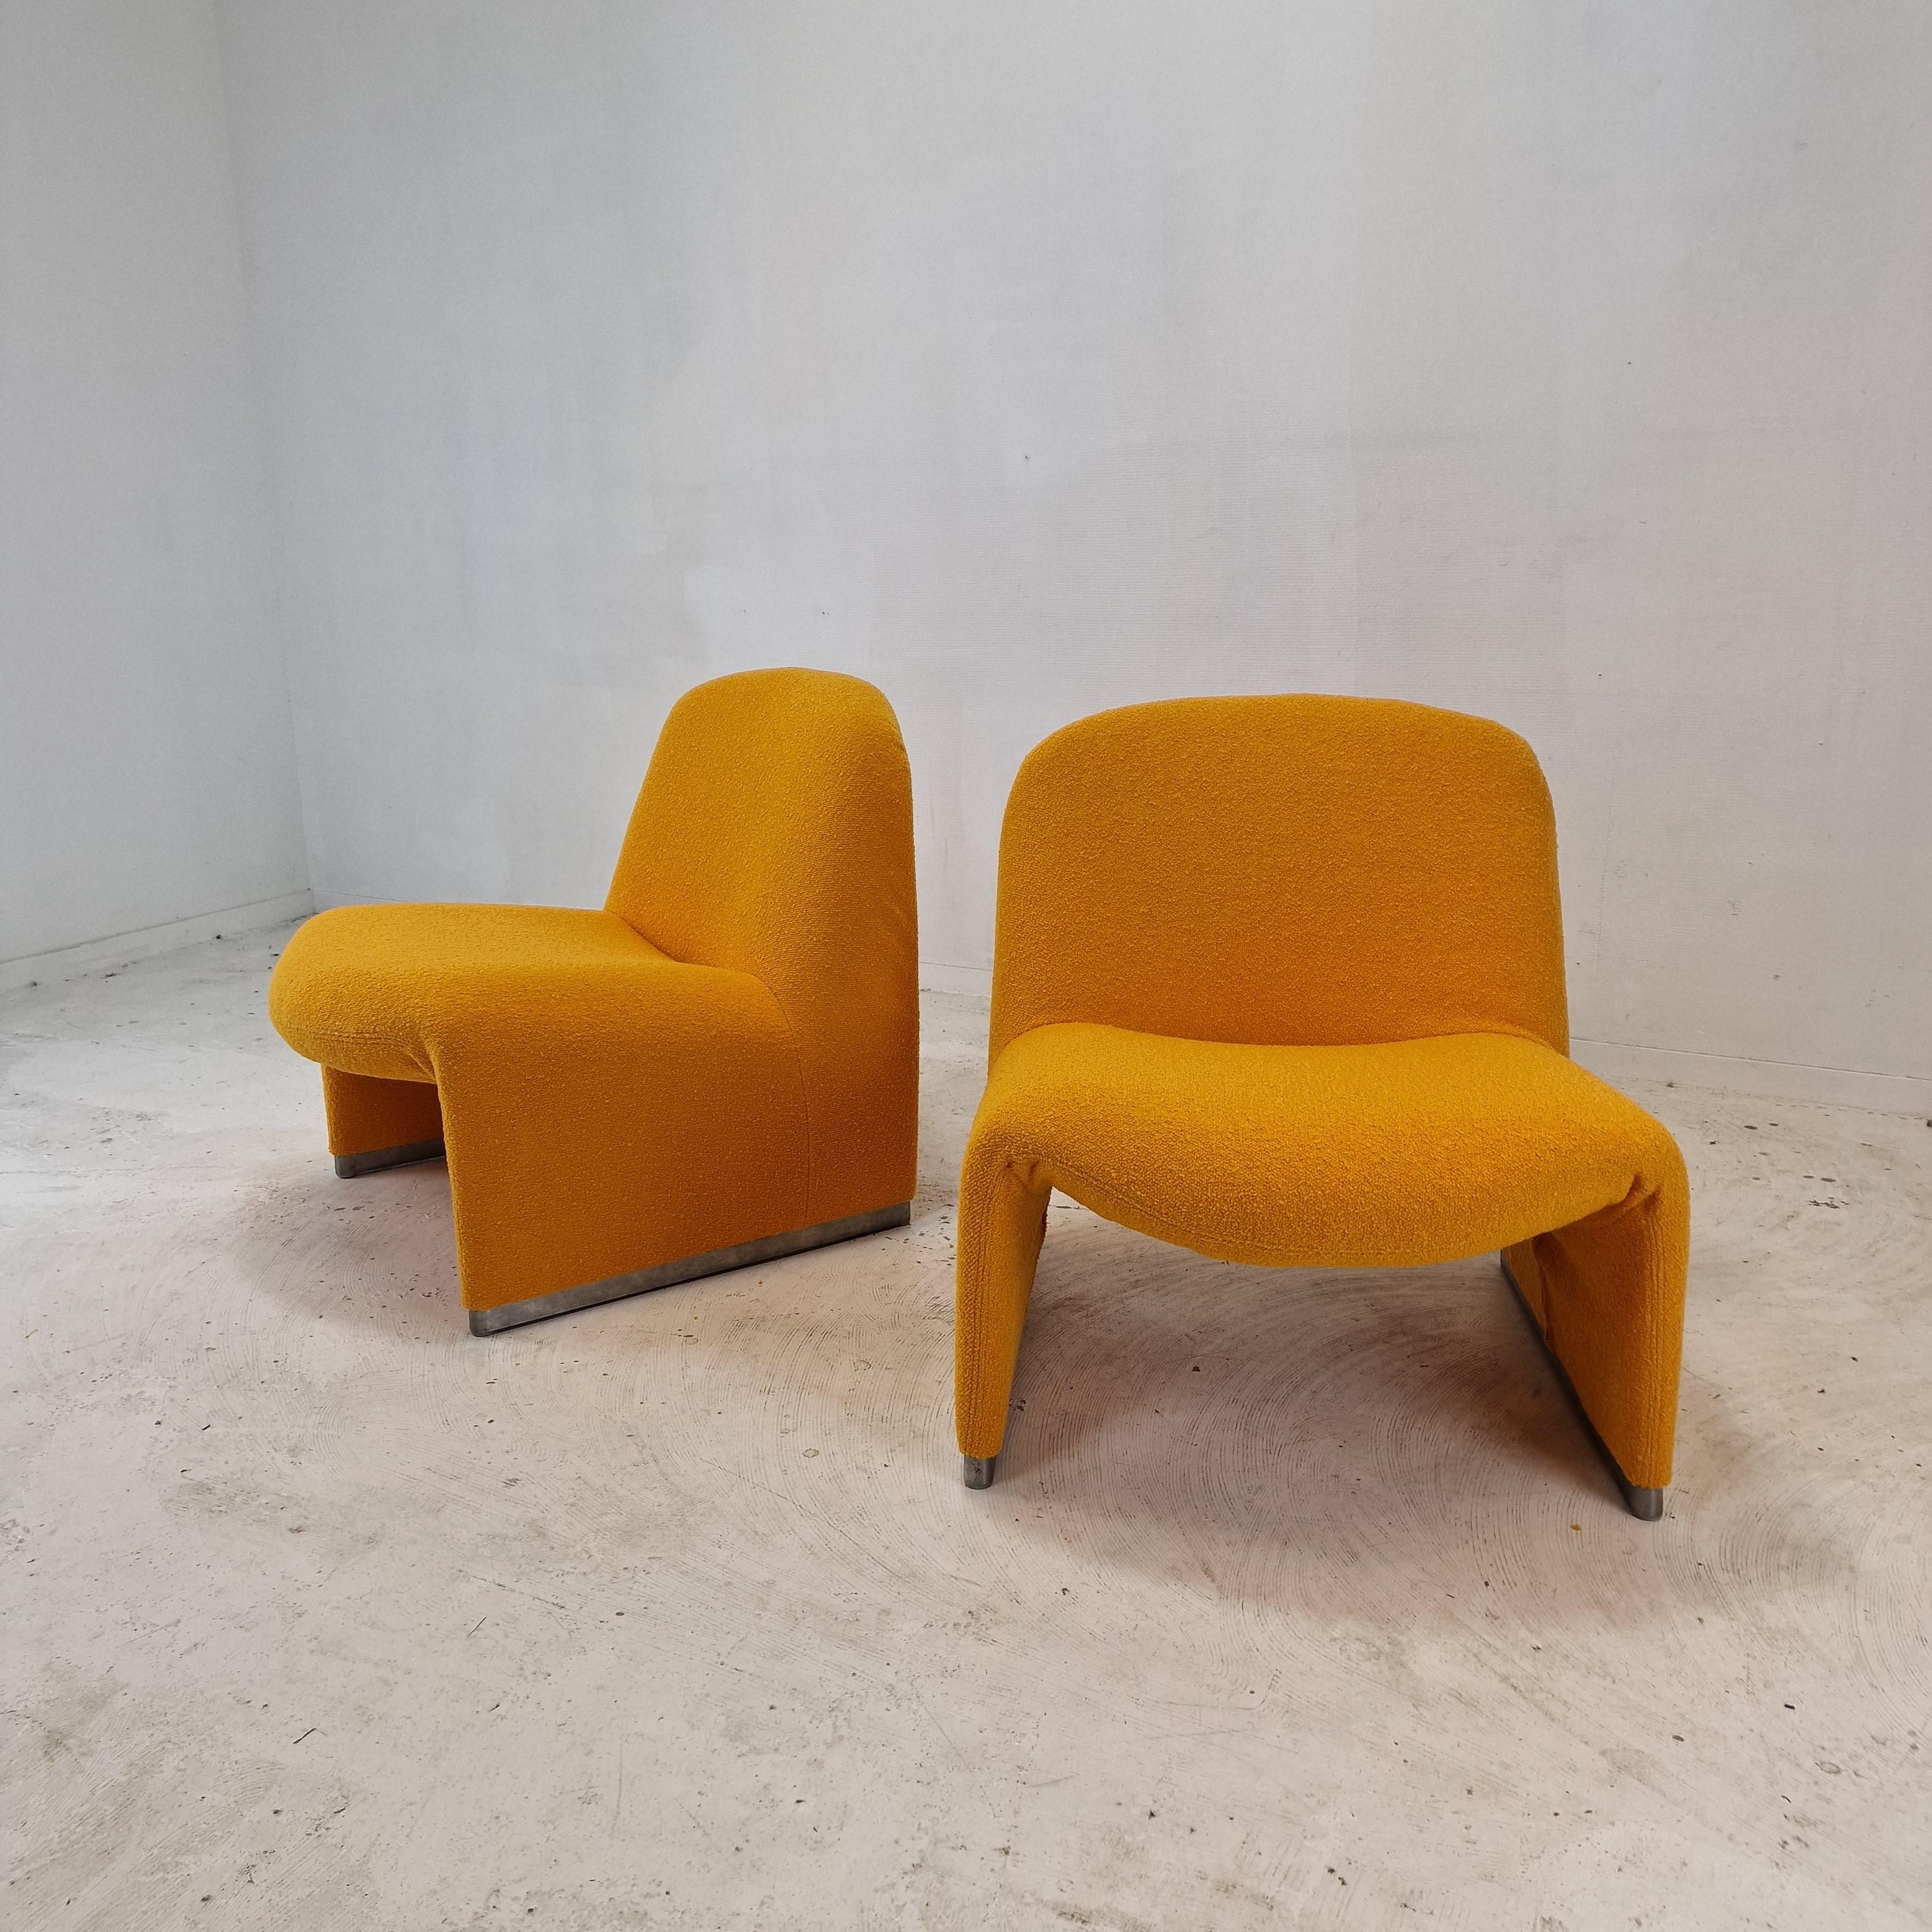 Lovely and comfortable Alky chair. 
Designed by Giancarlo Piretti in 1969, produced by Artifort. 

There are 3 chairs available, the price is for 1 chair.
They are just reupholstered with very cosy wool fabric in a stunning orange color. 
The chairs